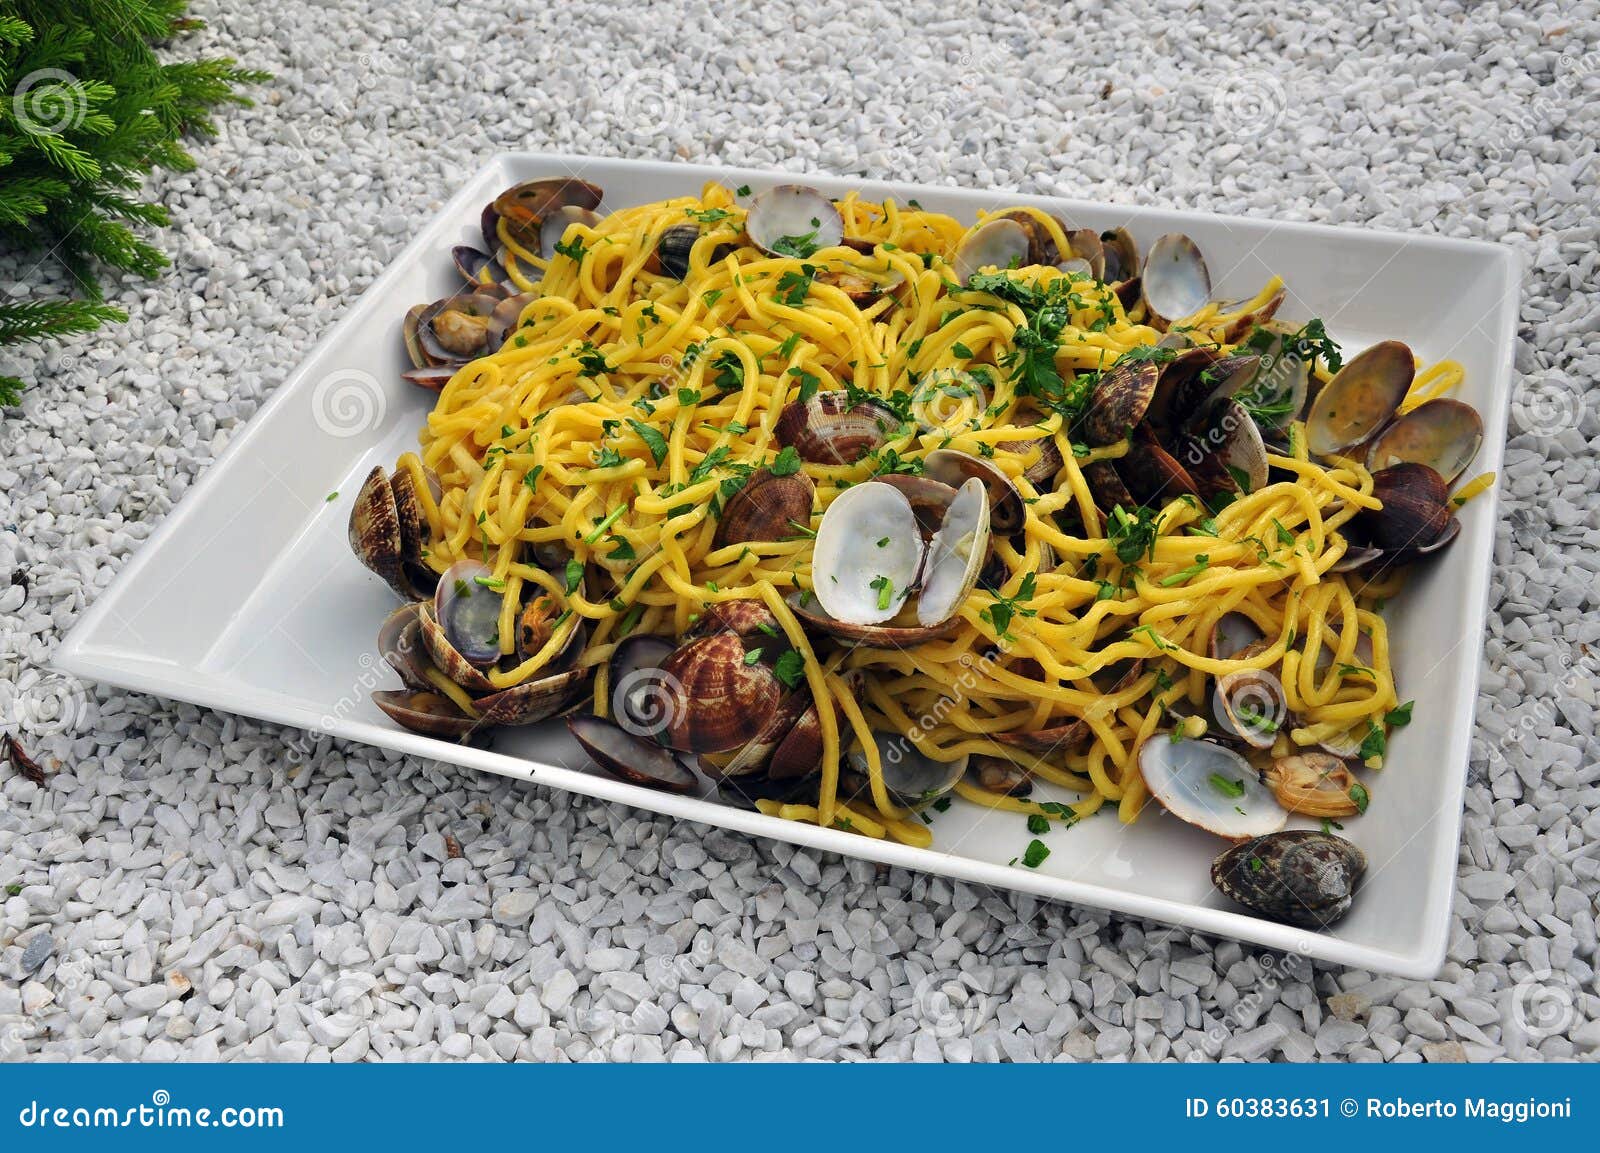 italian food. spaghetti alle vongole, pasta with clams